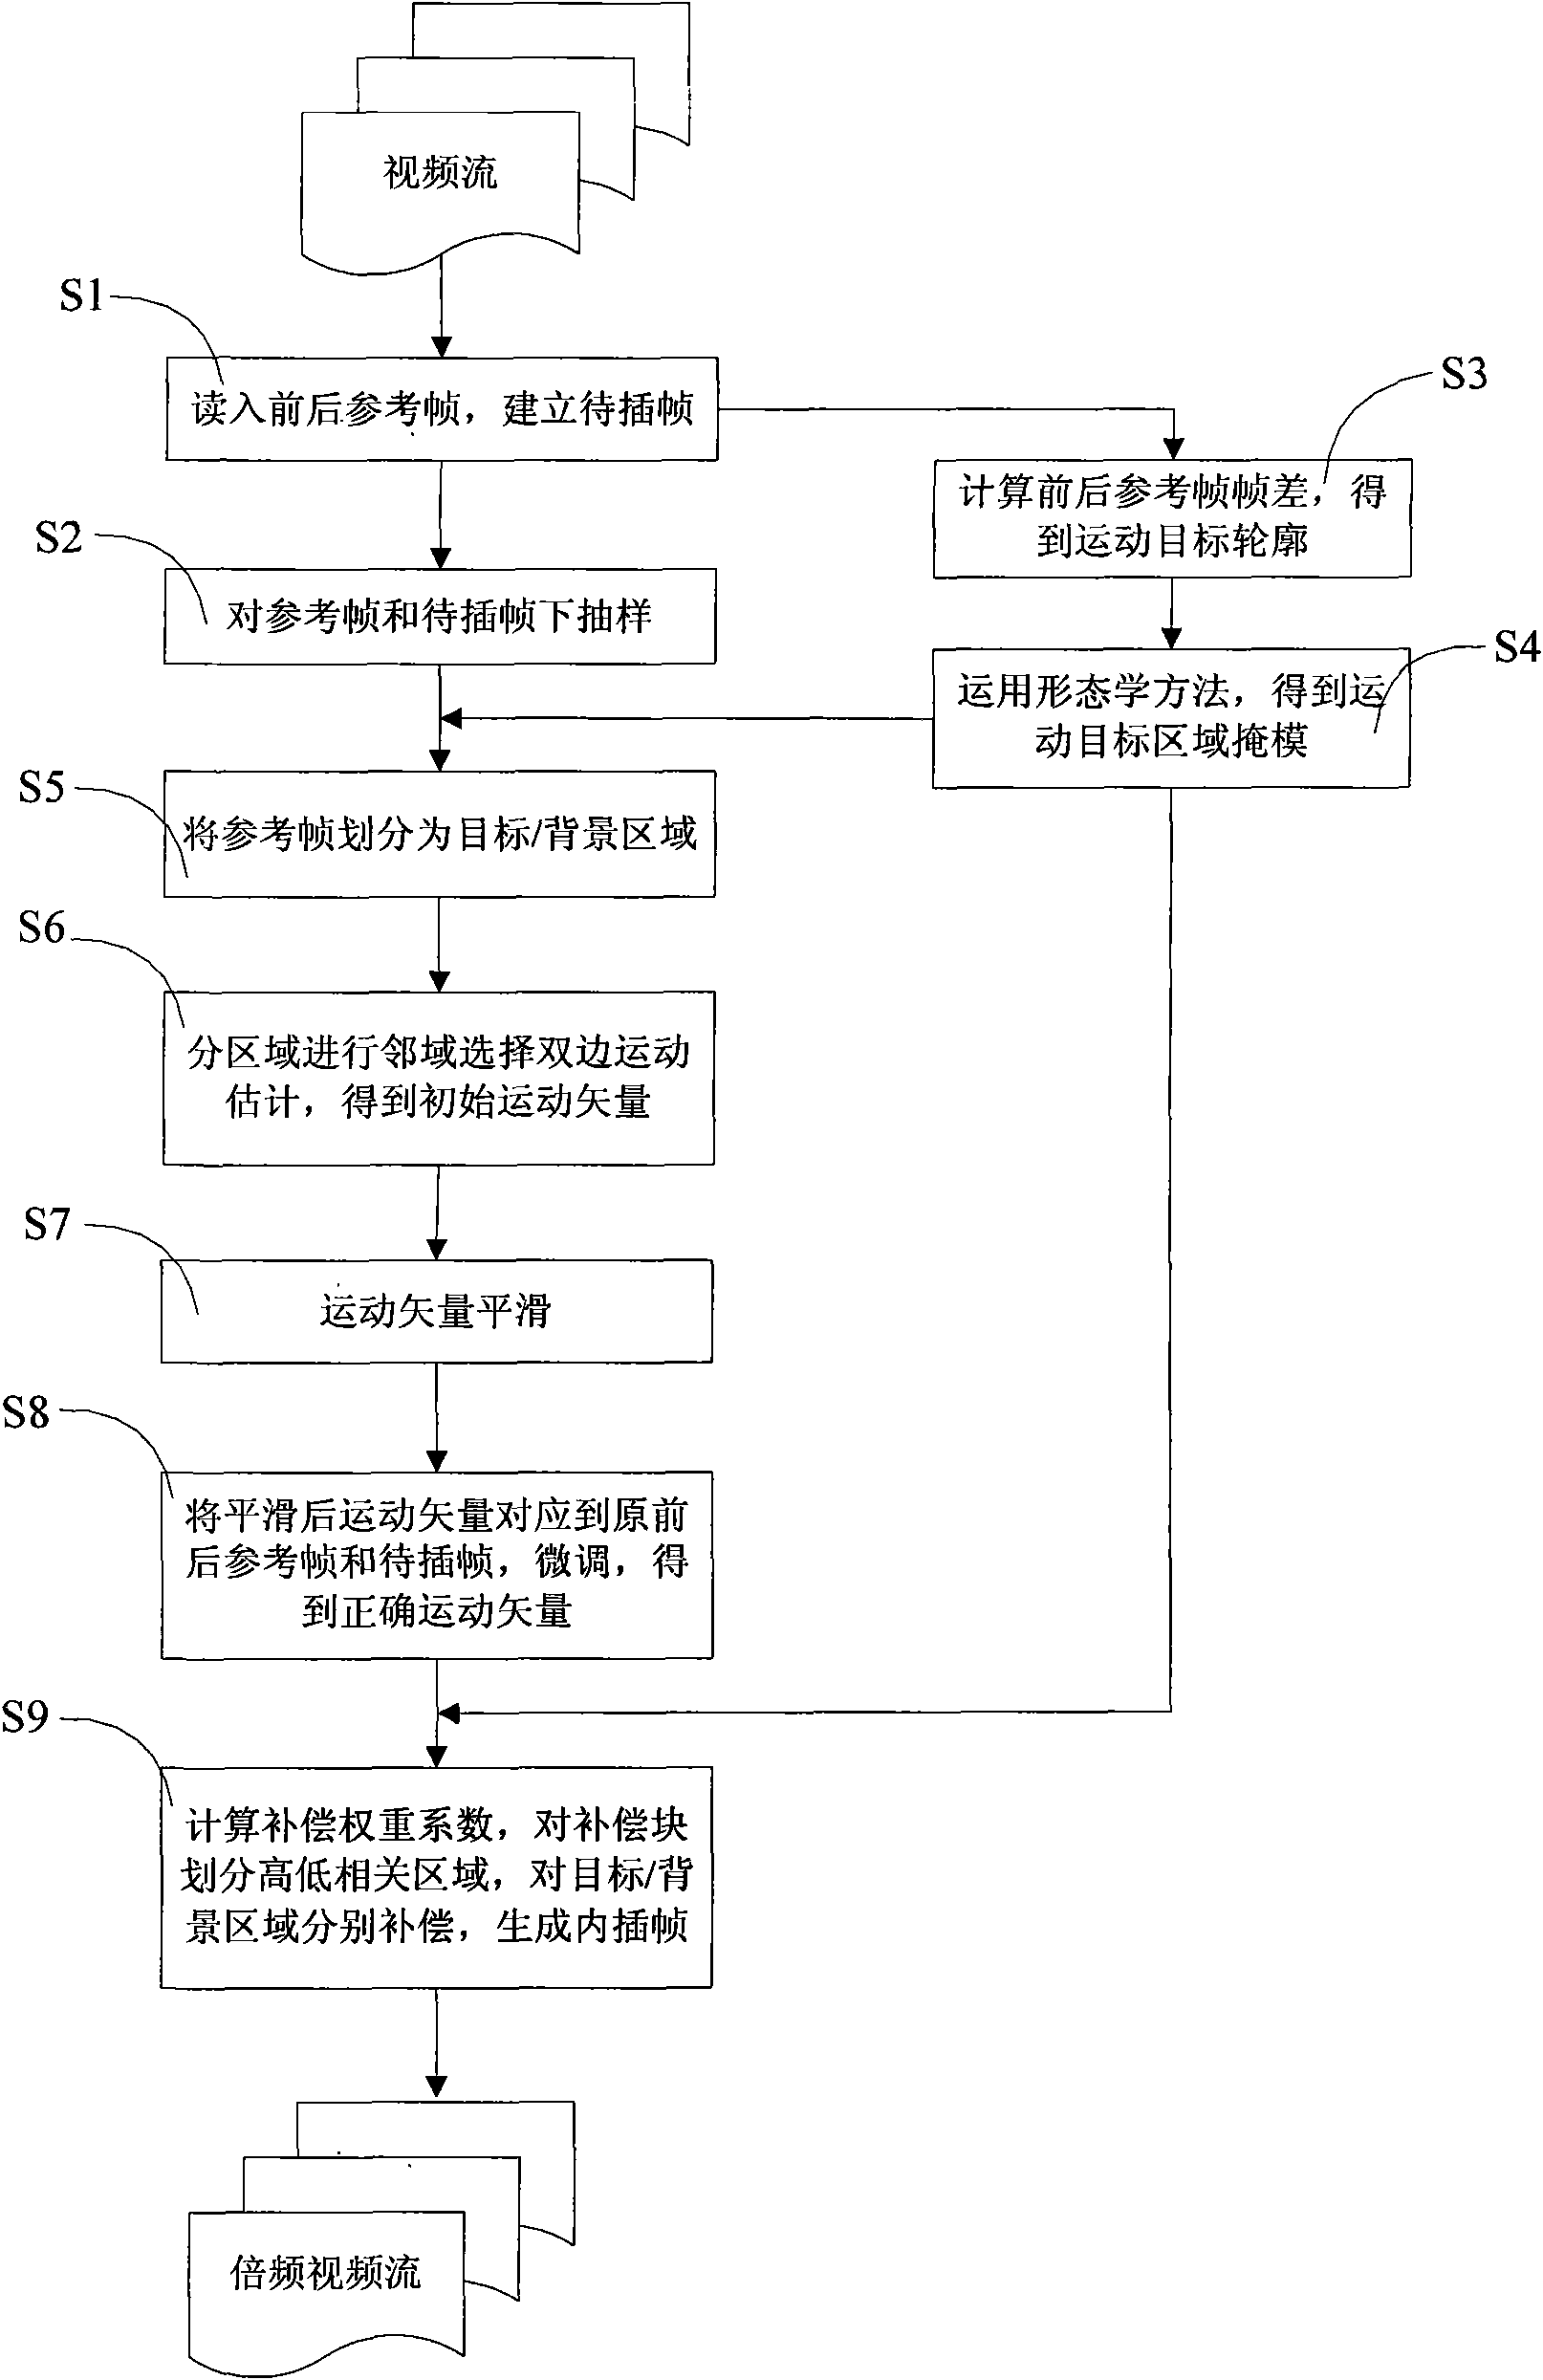 Frame frequency lifting method for combining target partition and irregular block compensation